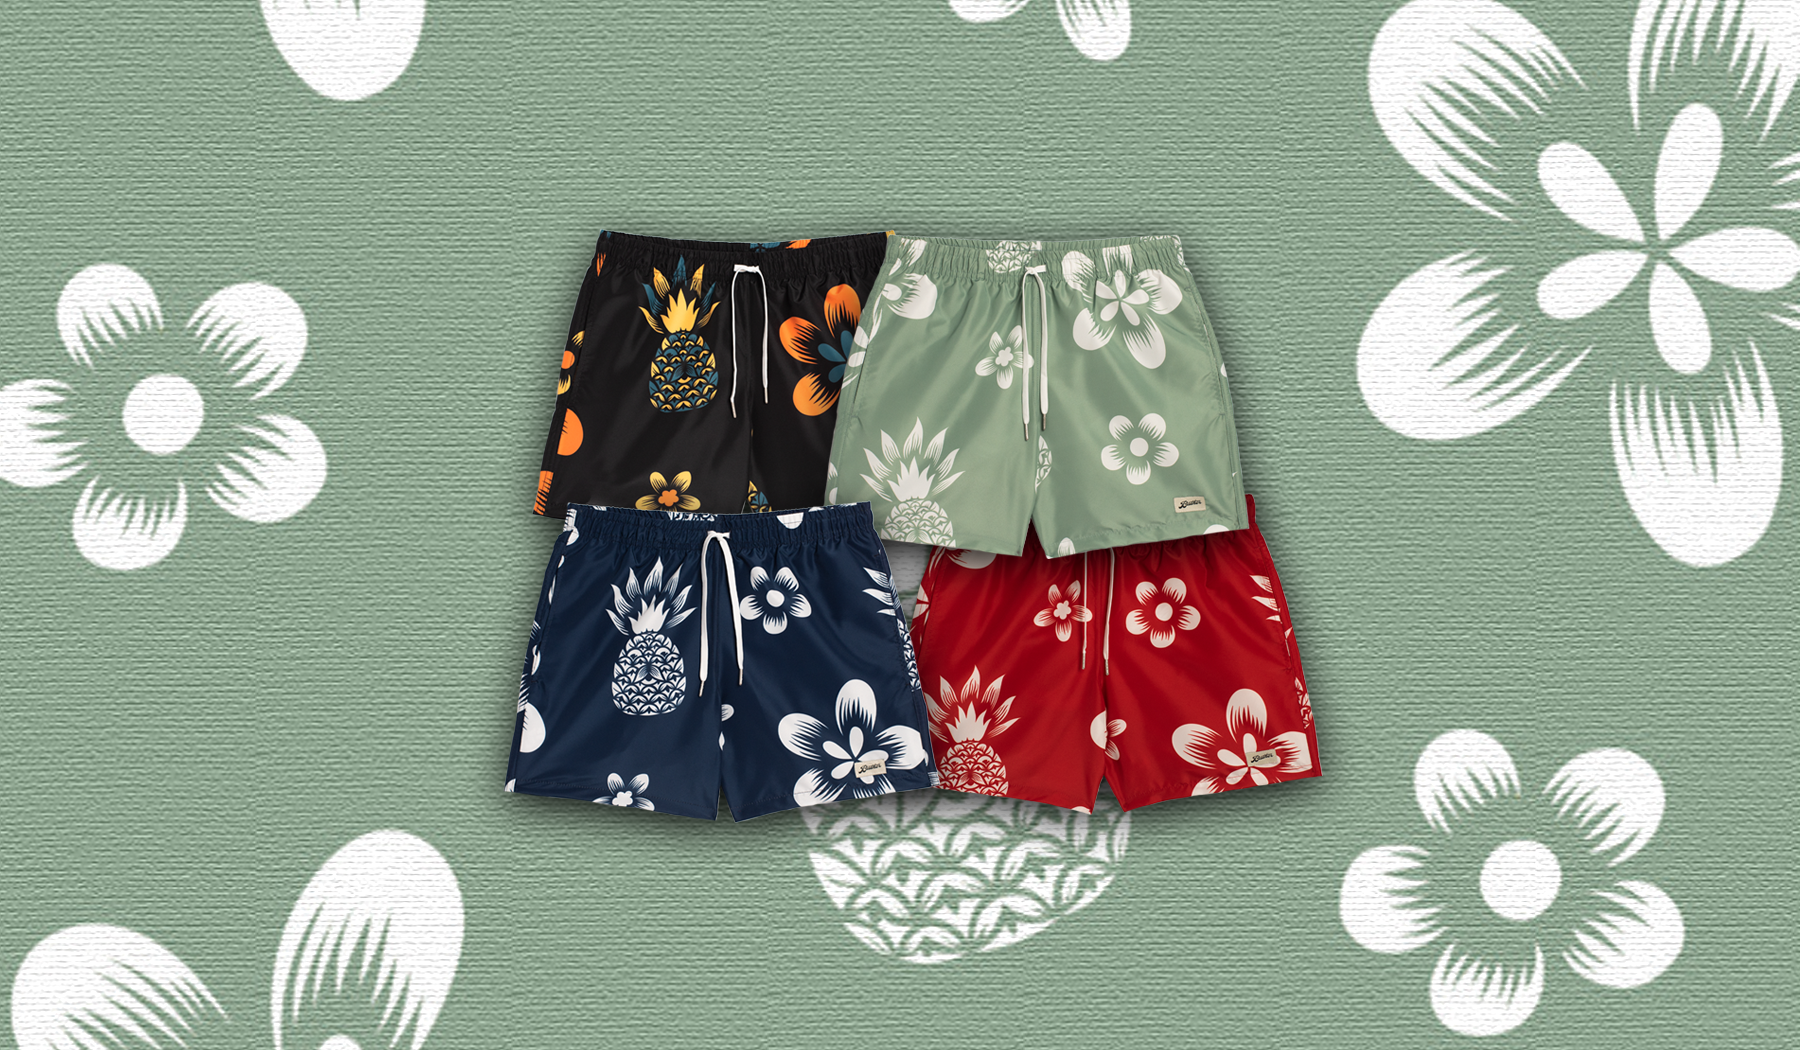 An image of all four of the styles of Bather Coastal Floral Pattern swim trunks